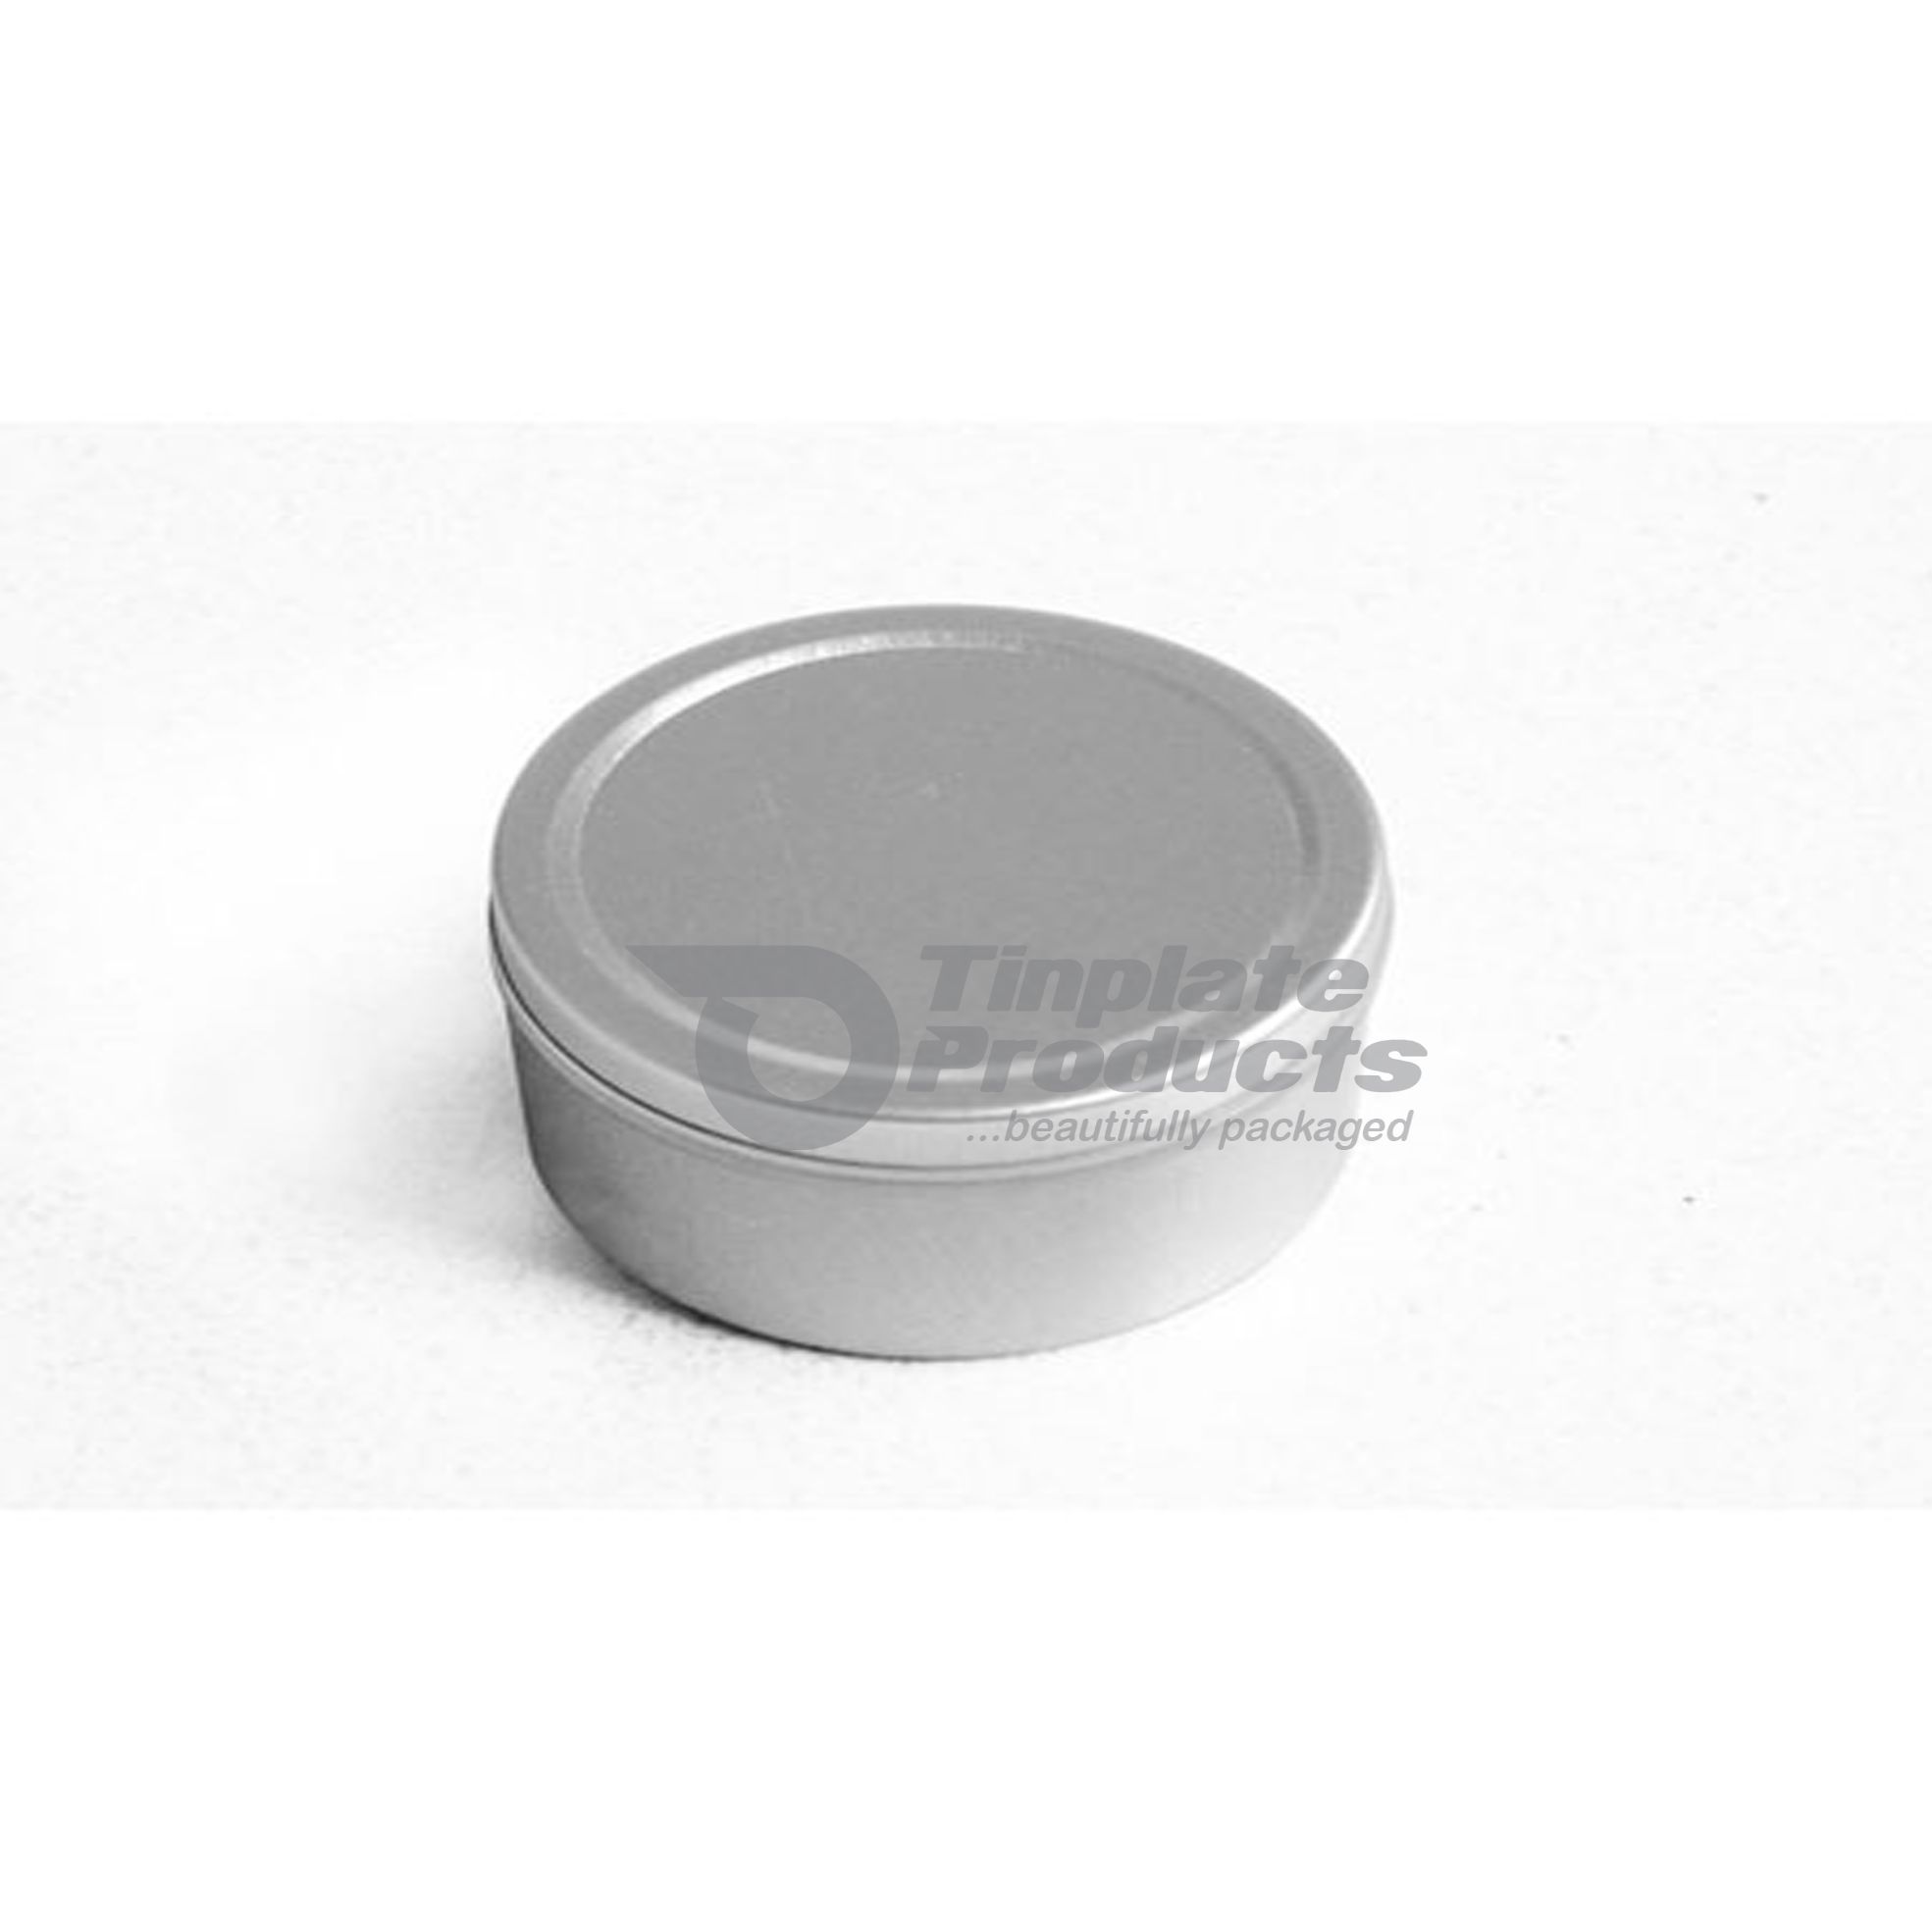 Small Round Metal Tins with Lids - Bespoke Packaging